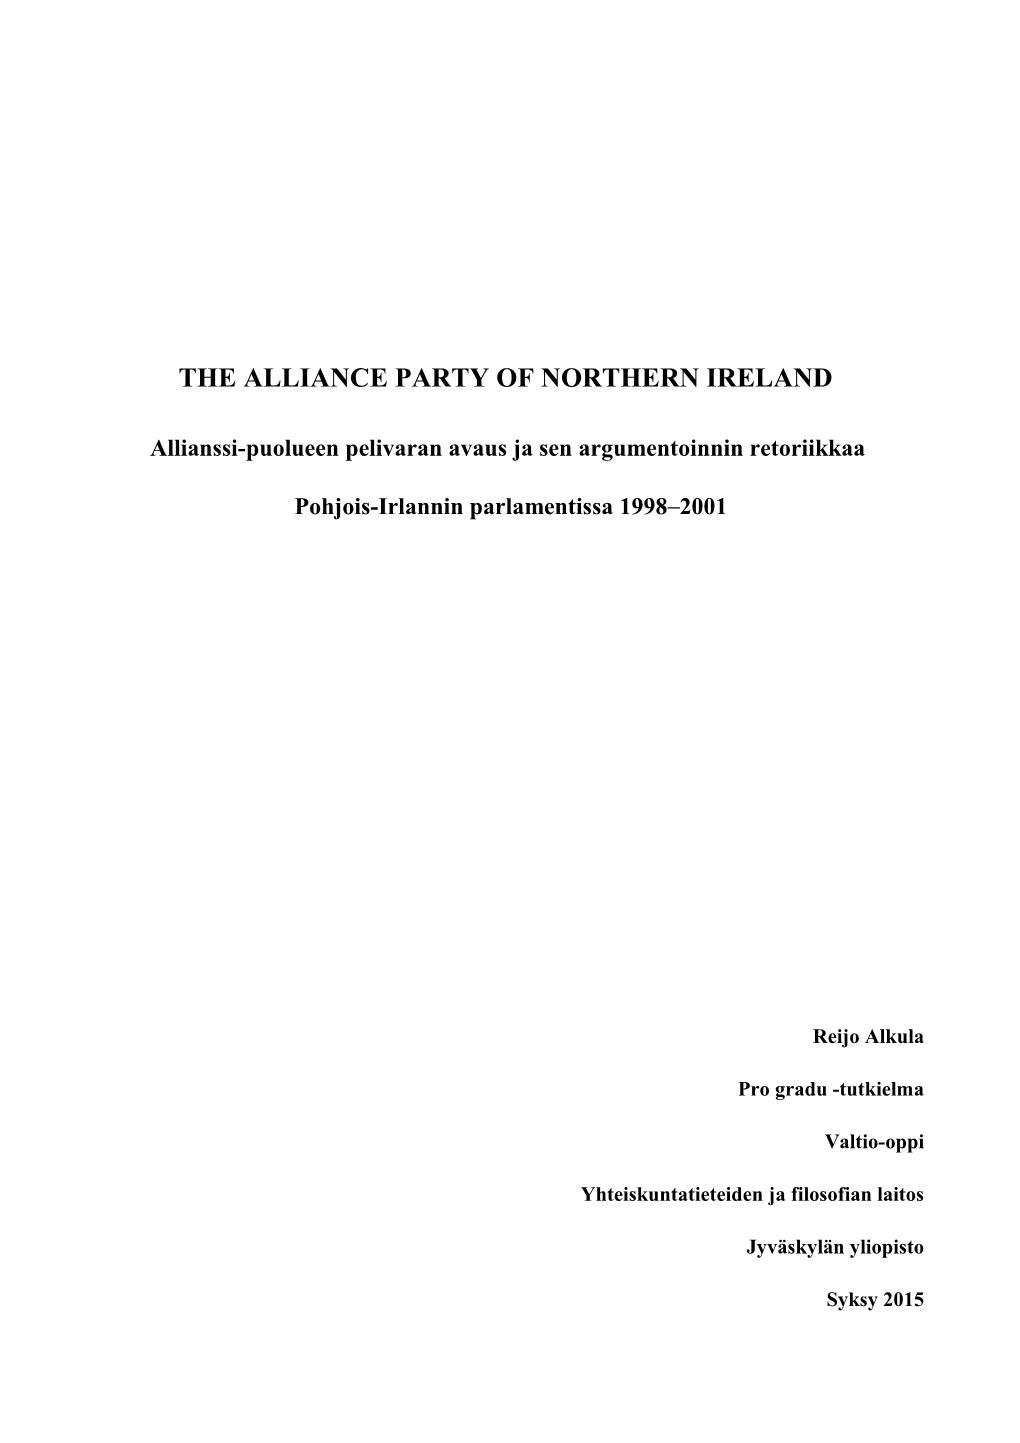 The Alliance Party of Northern Ireland